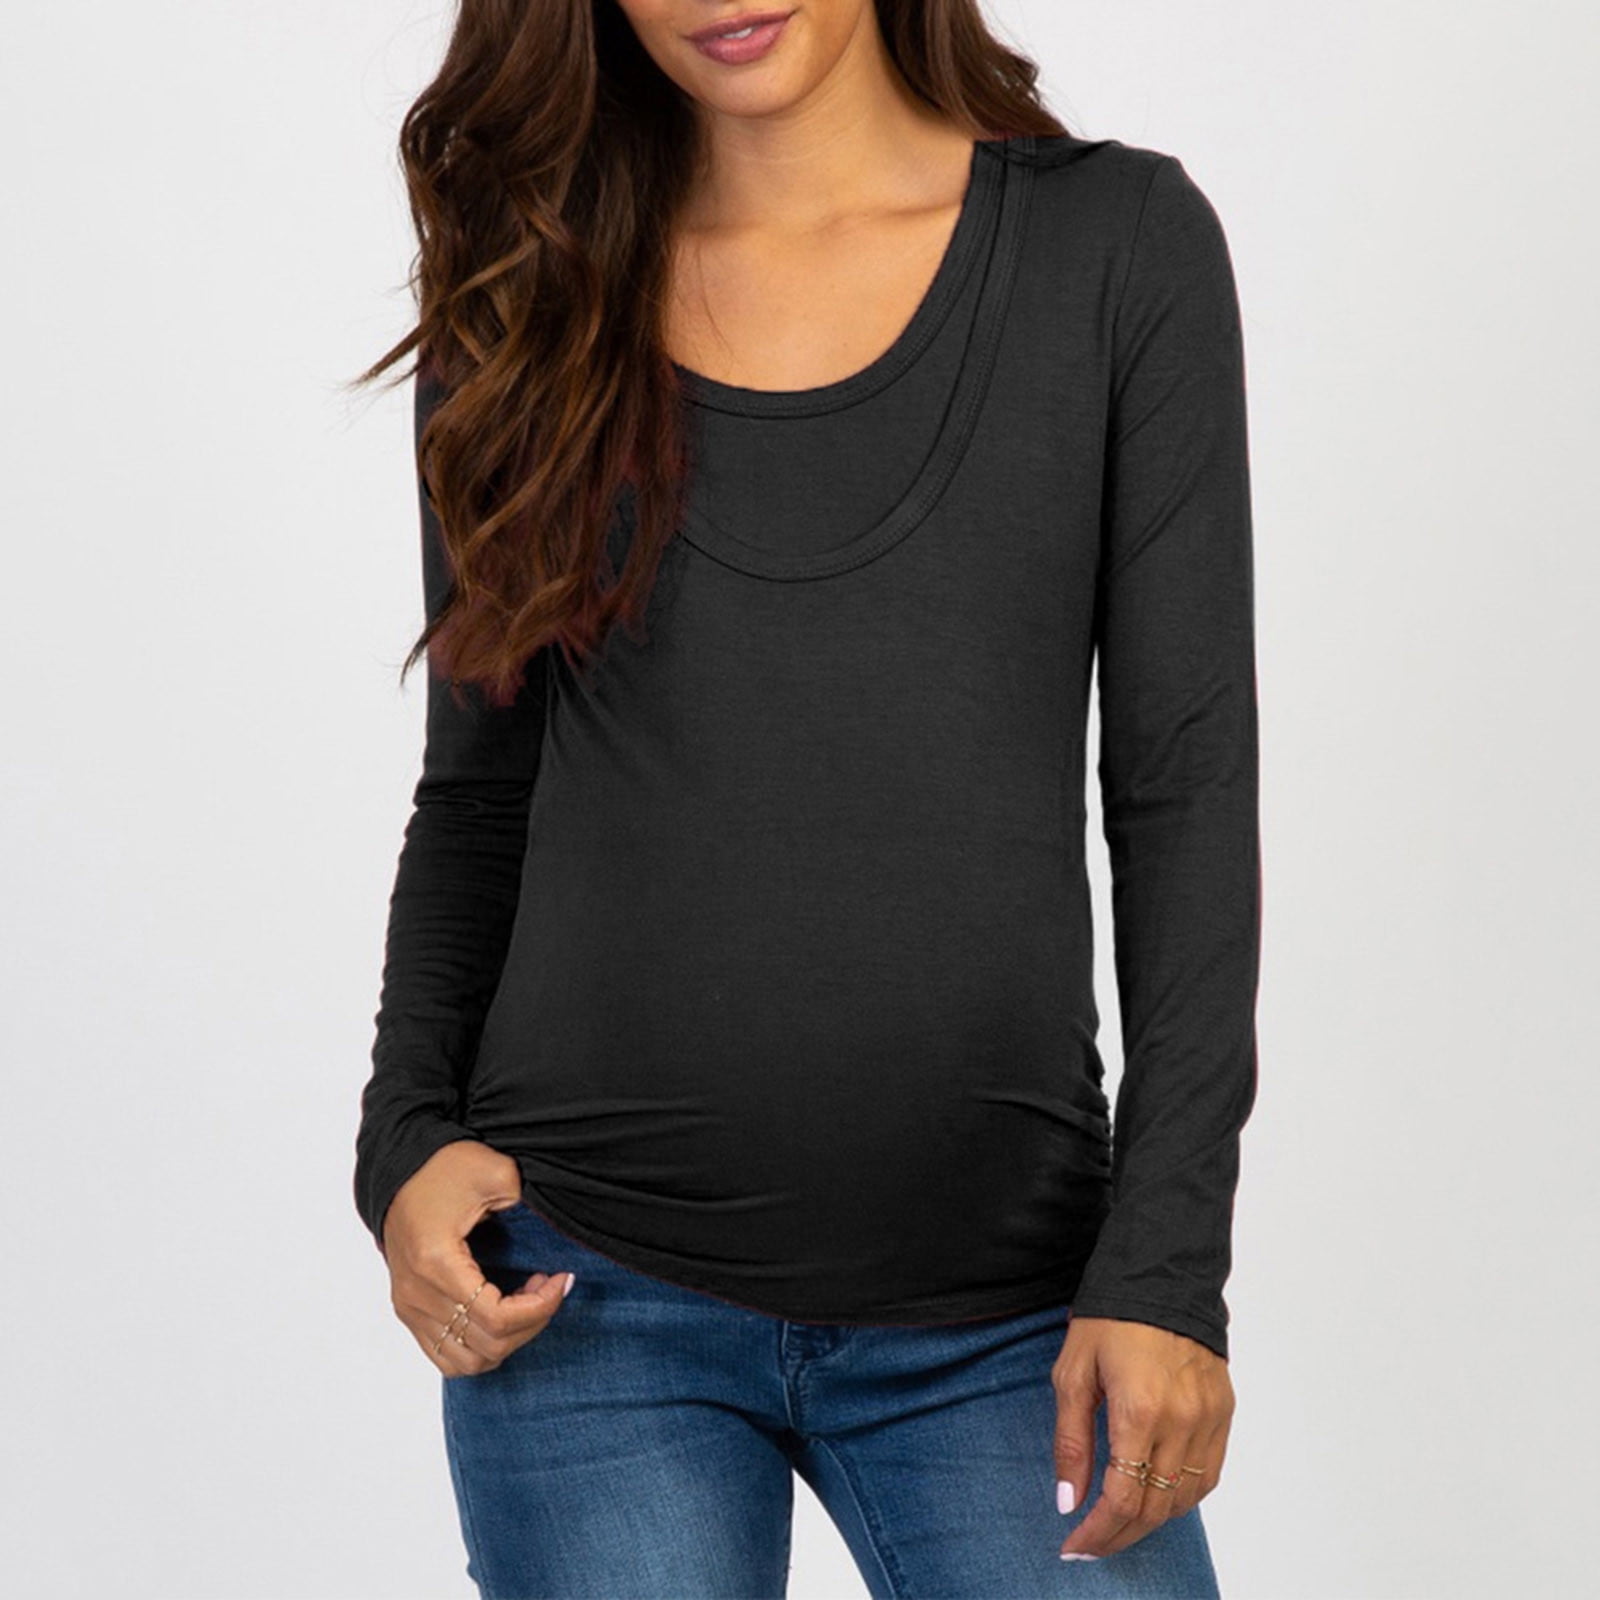 Women Mom Pregnancy Long Sleeve Shirt Solid Tunic Tops Maternity Blouse Clothes